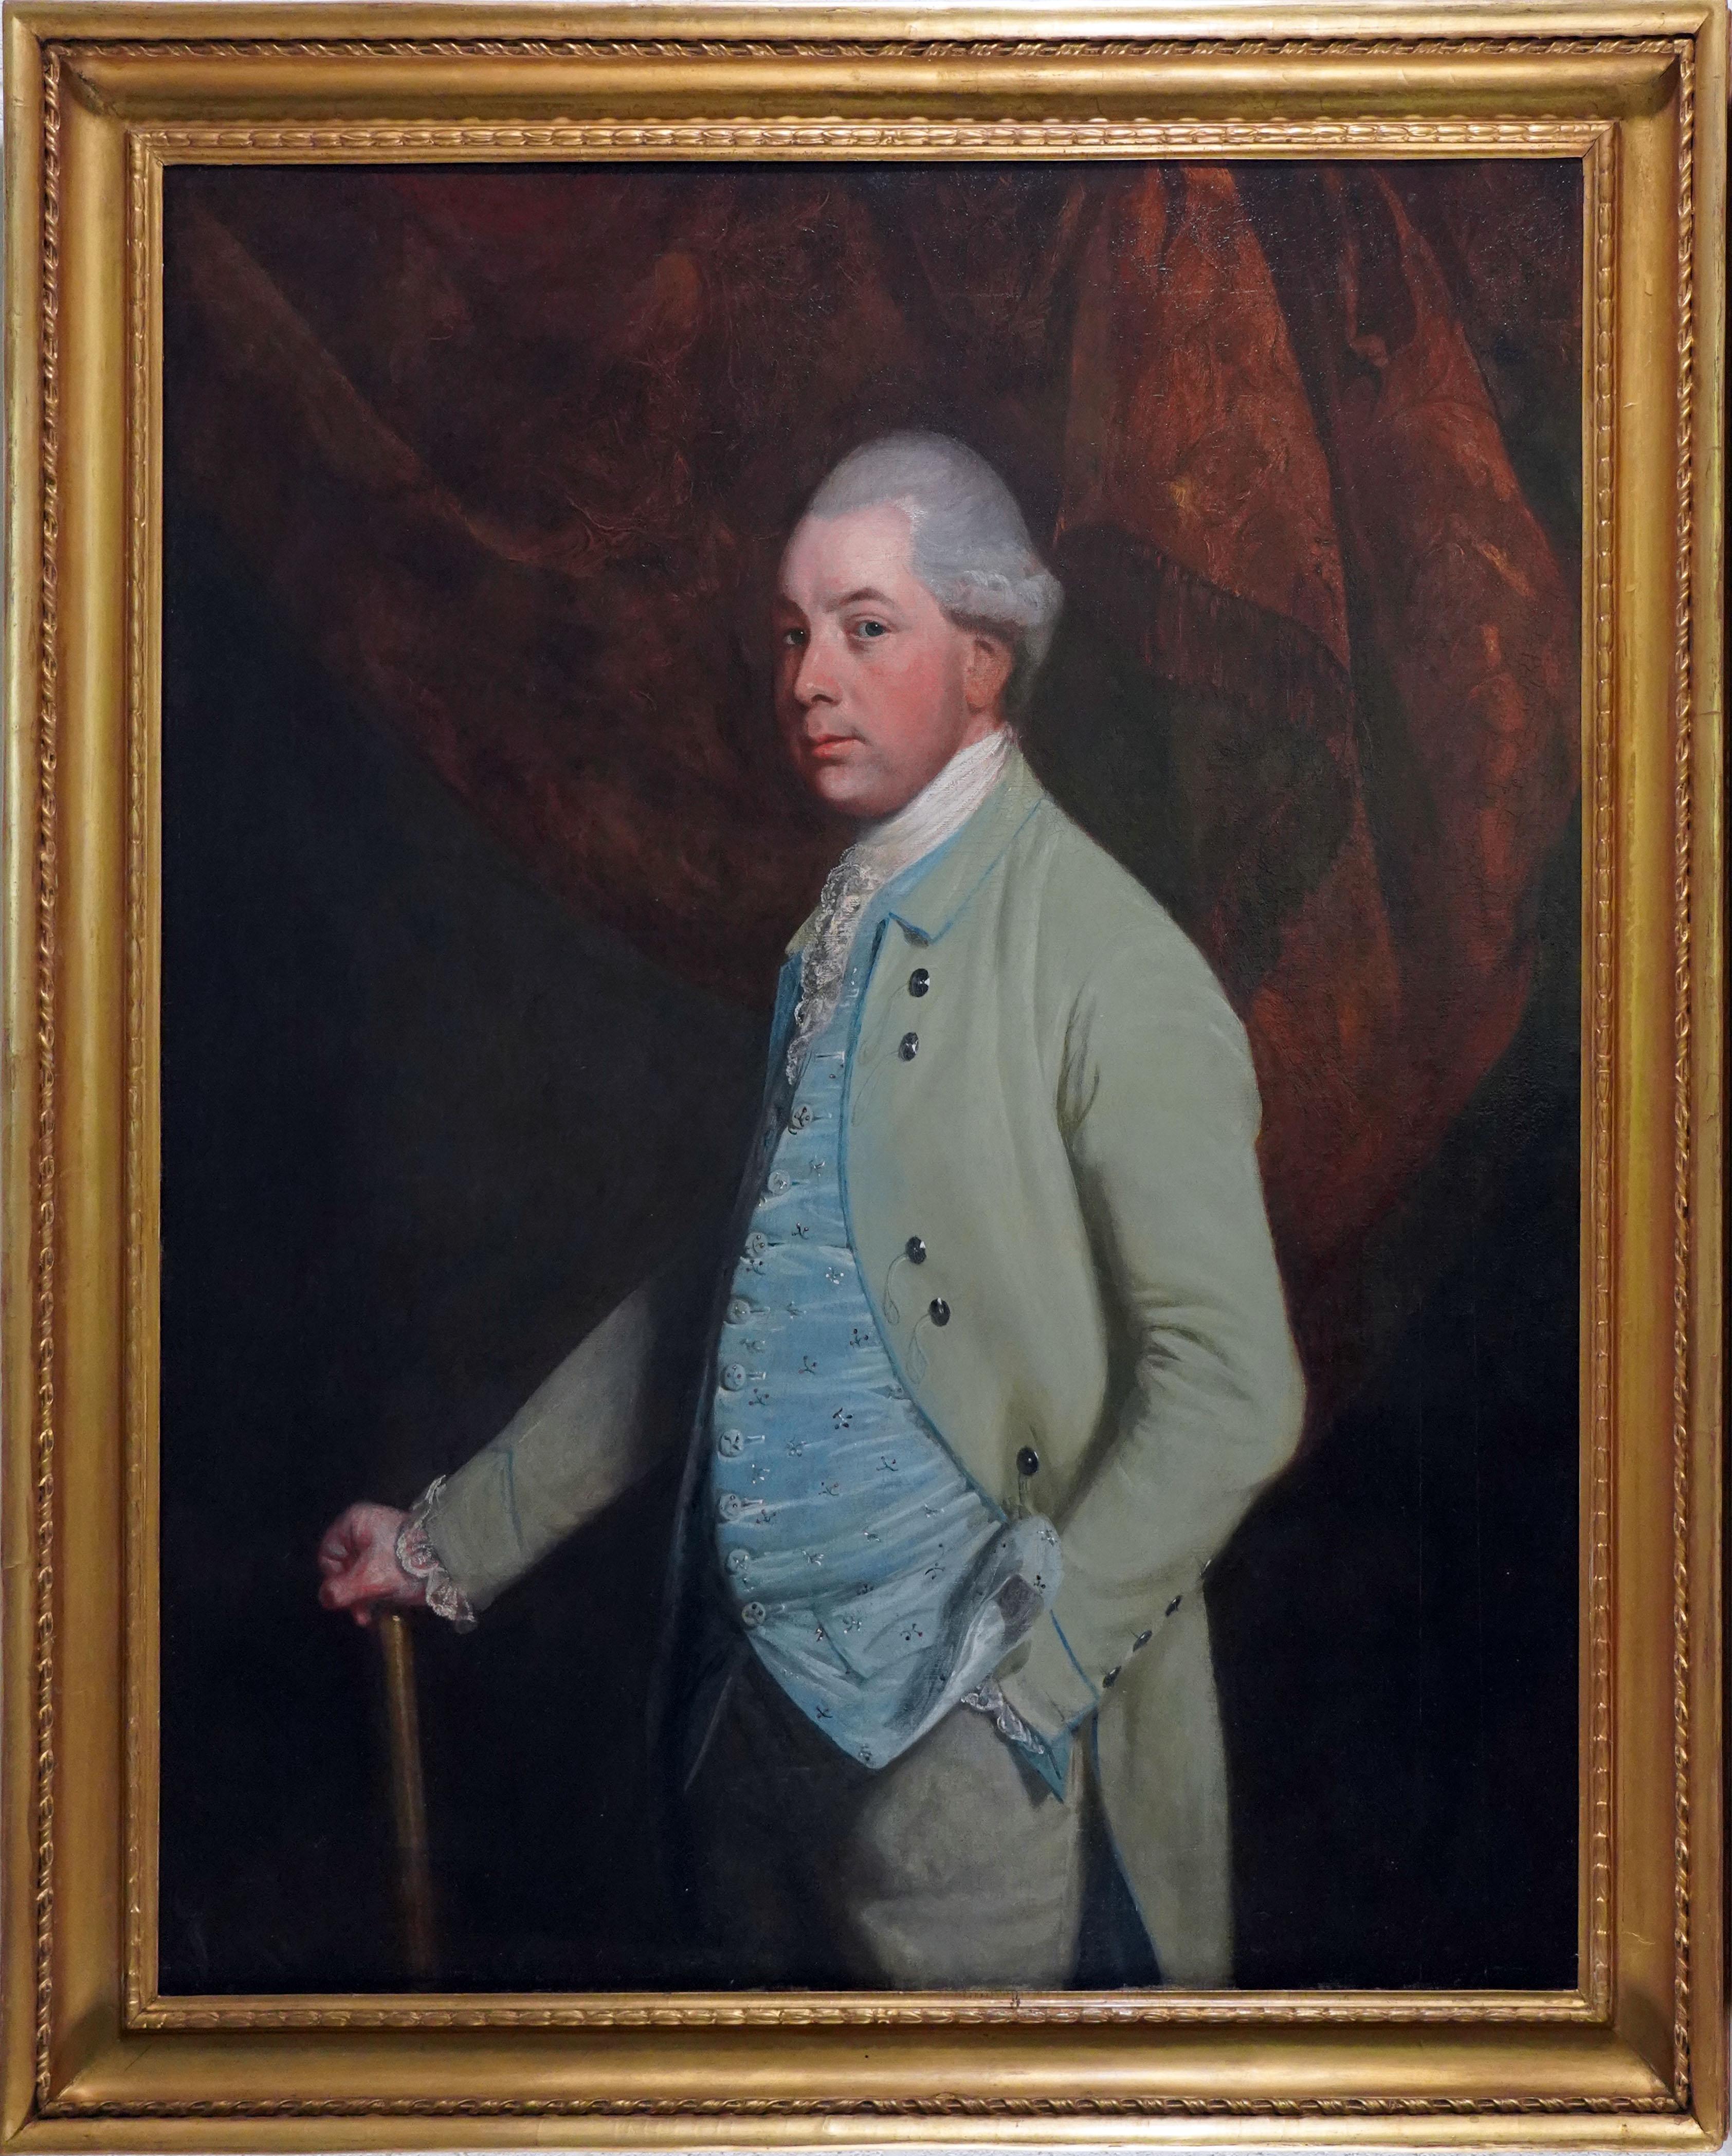 Portrait of William, Baron Craven wearing a green jacket in an interior